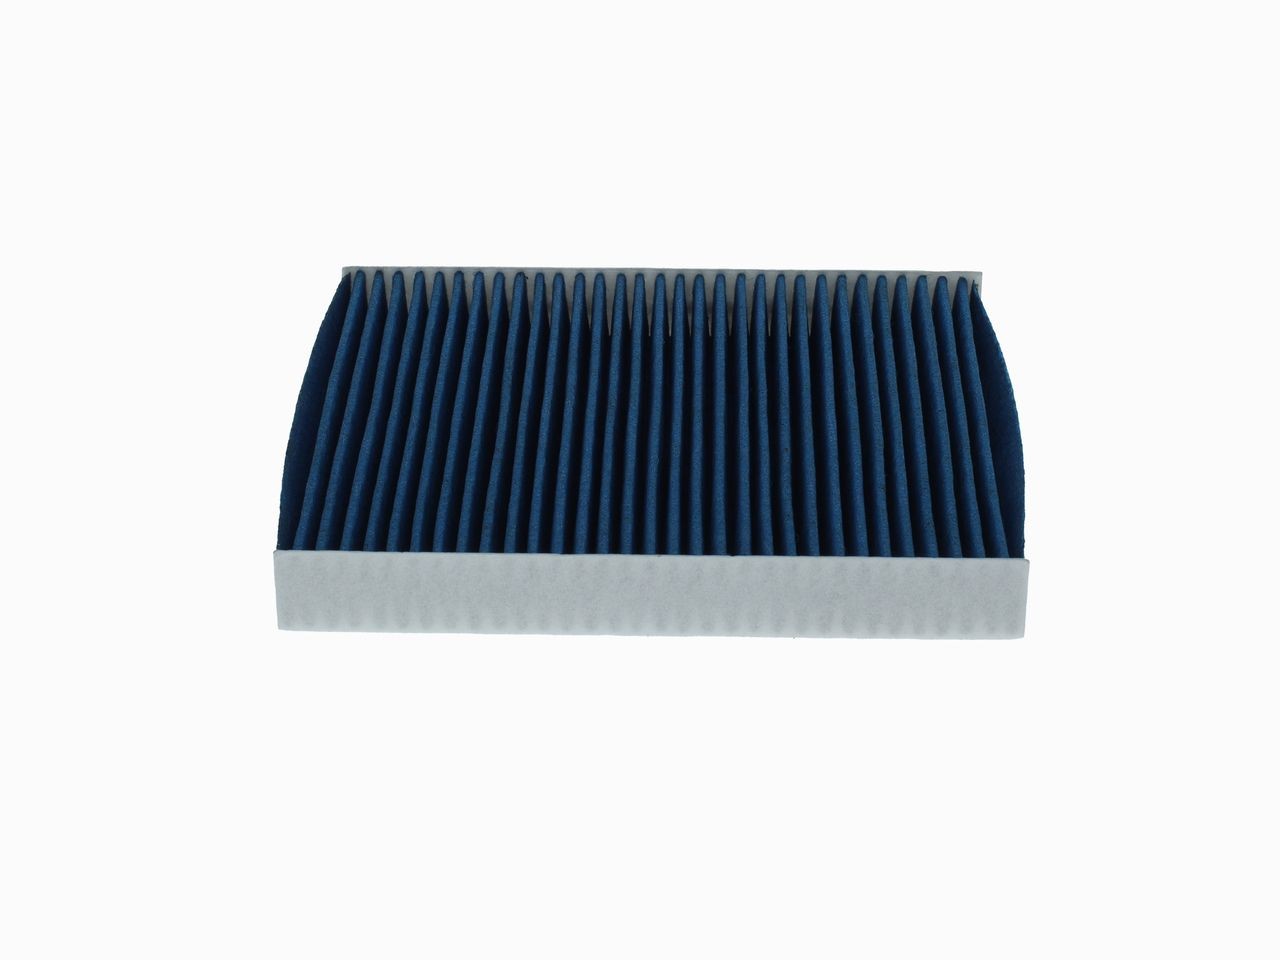 BOSCH 0986628604 Air conditioner filter Activated Carbon Filter, with antibacterial action, Particle Separation Rate >98% for 2.5µm (fine matter), with anti-allergic effect, with antiviral effect, with fungicidal effect, 252 mm x 216 mm x 32 mm